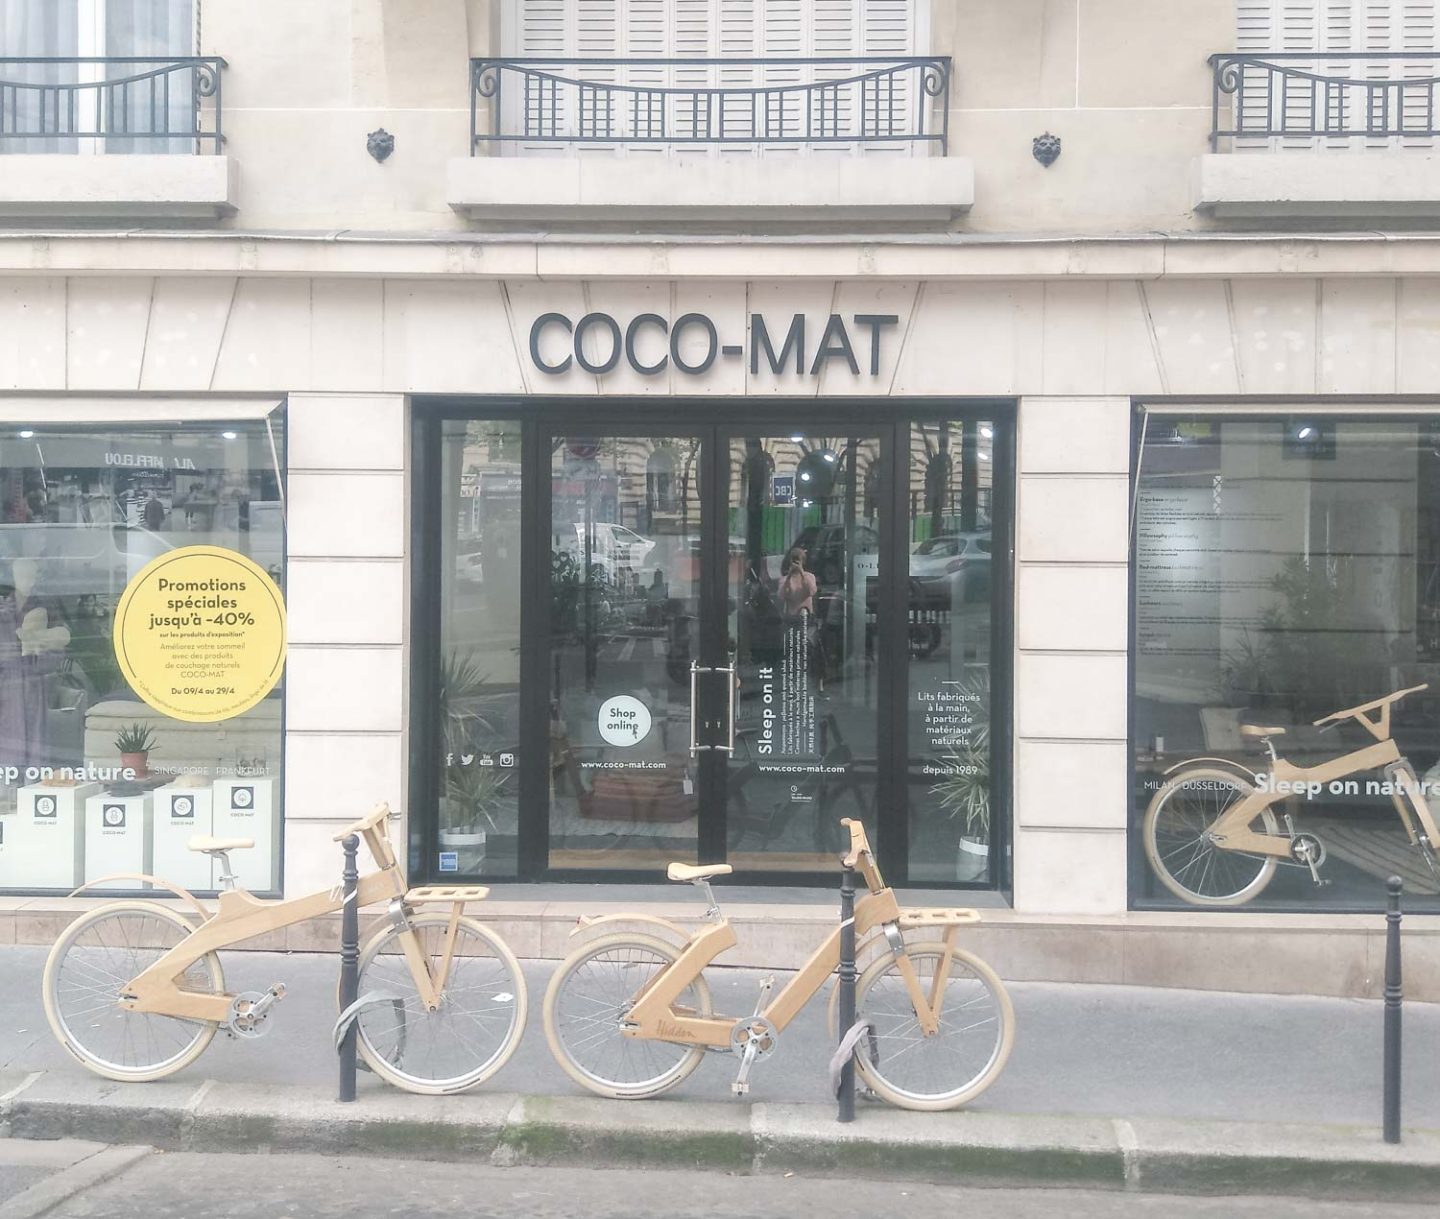 Wooden bicycles outside Coco-mat